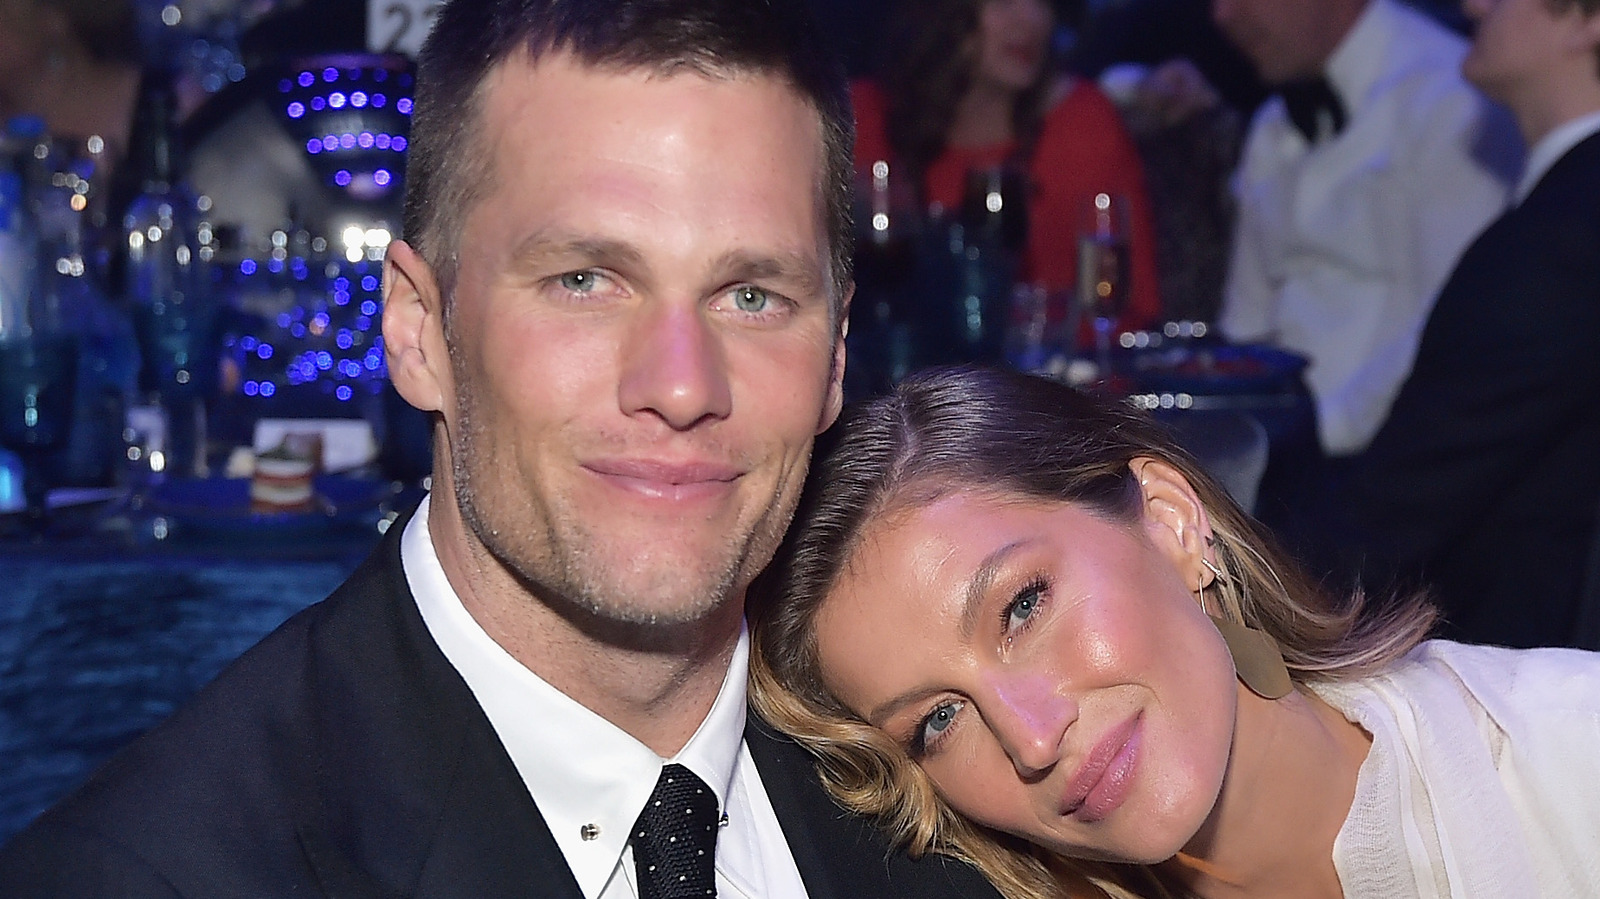 Tom Brady And Gisele Bündchen’s Marriage Problems Are Reportedly Far From Over